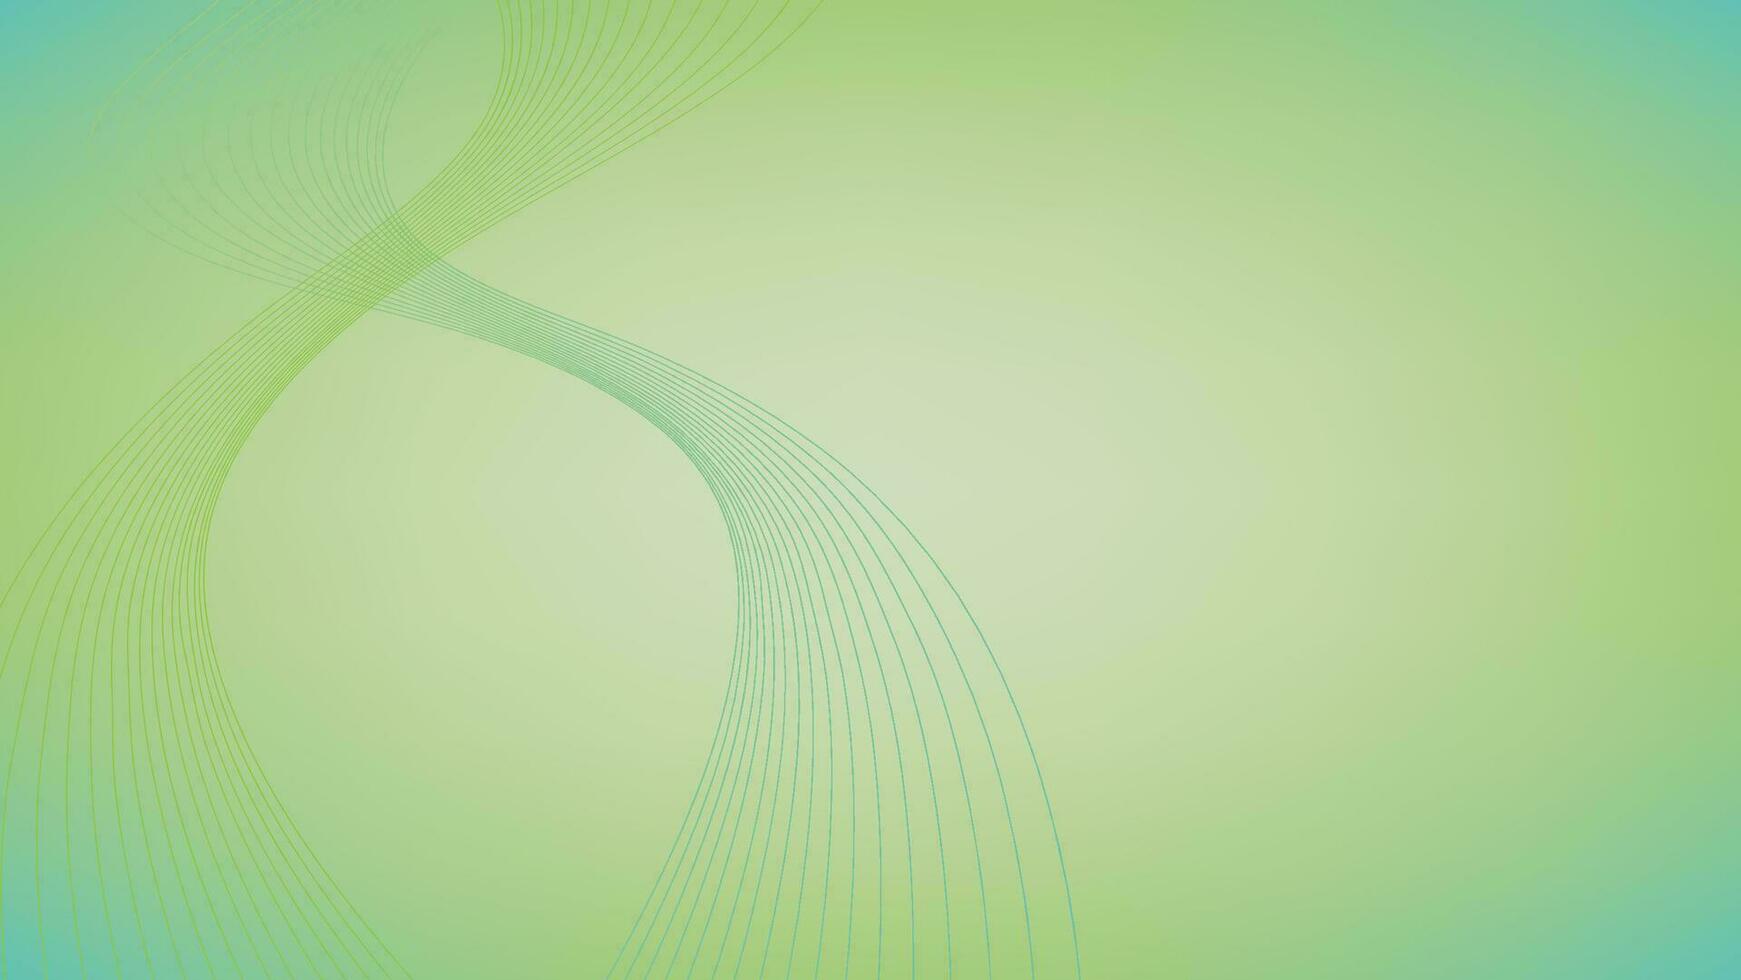 abstract wave background with green light for decorative graphic design element vector